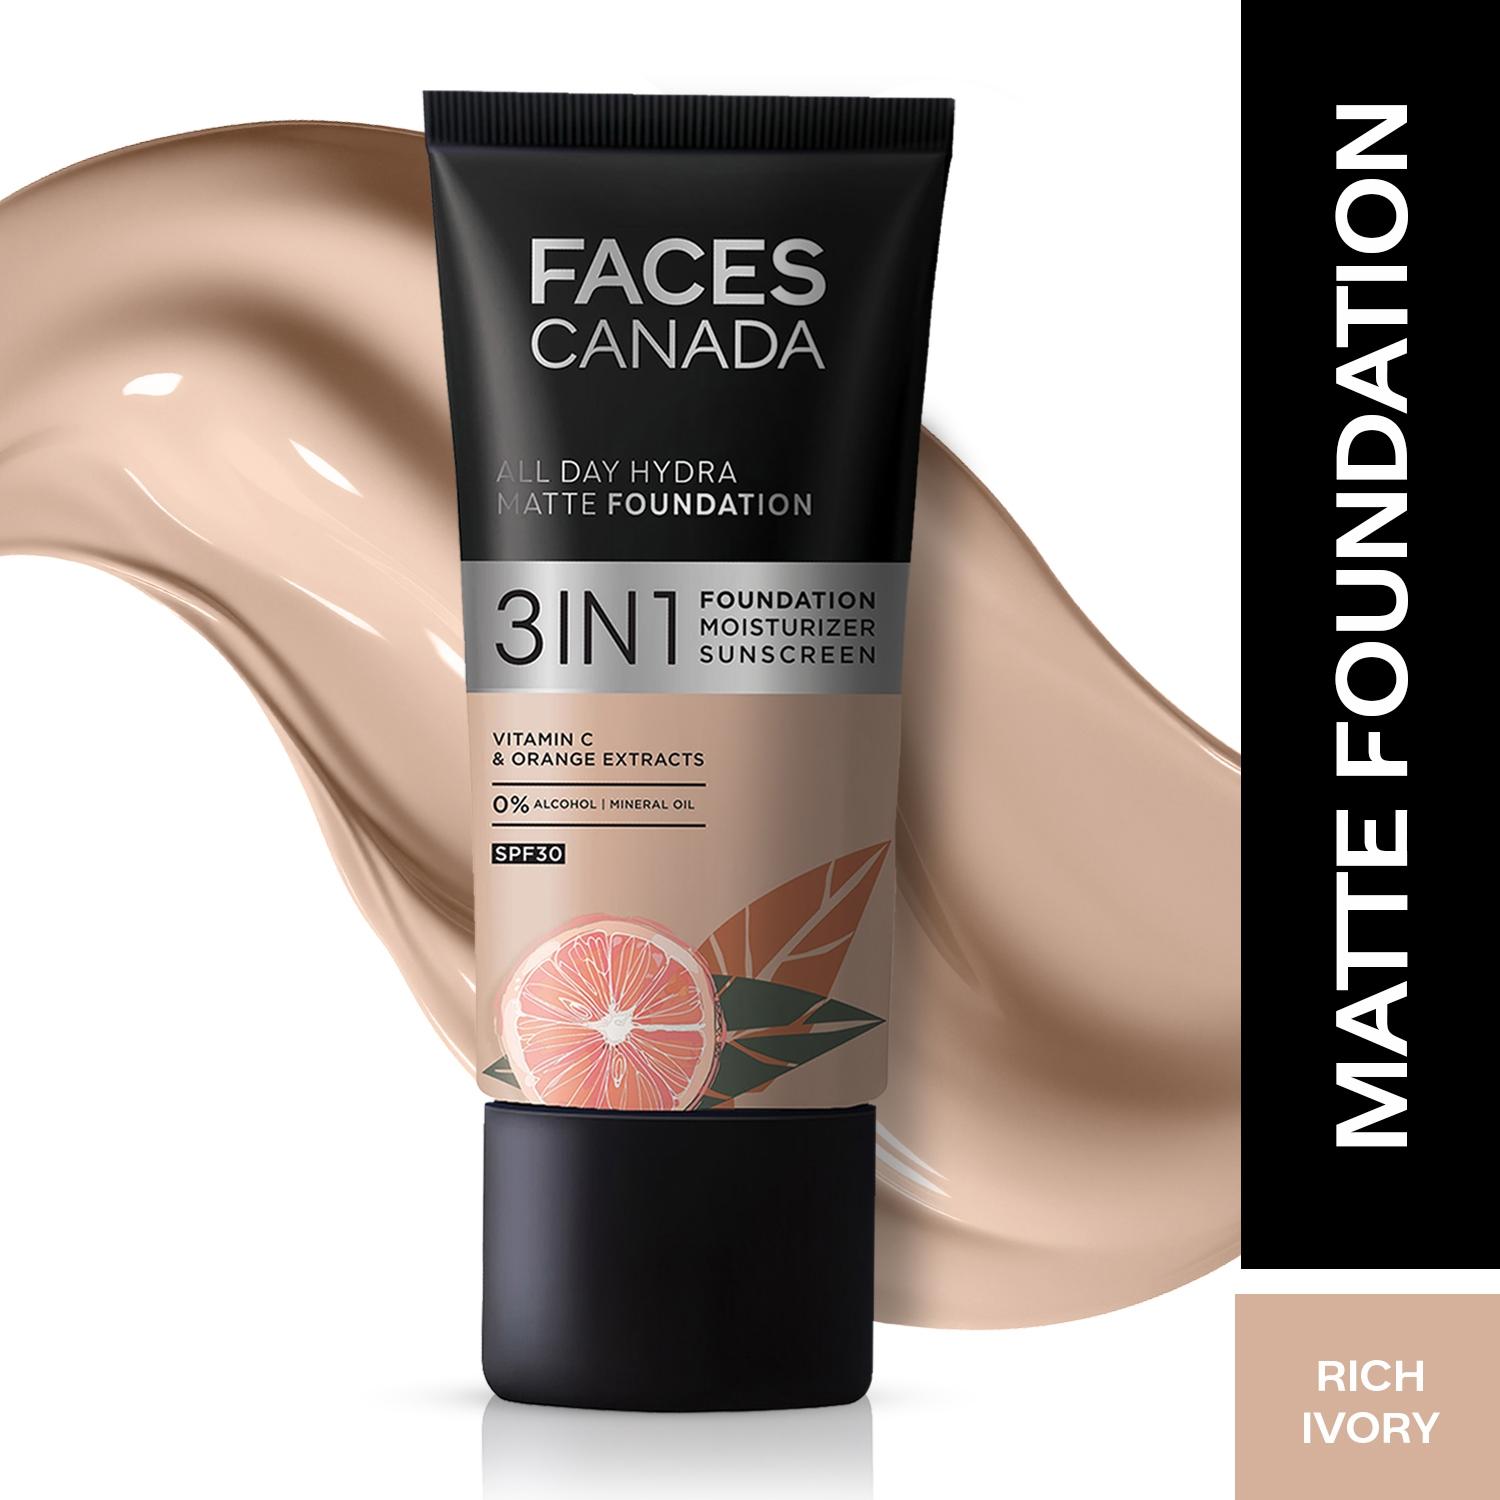 faces canada all day hydra matte foundation - 13 rich ivory (25ml)